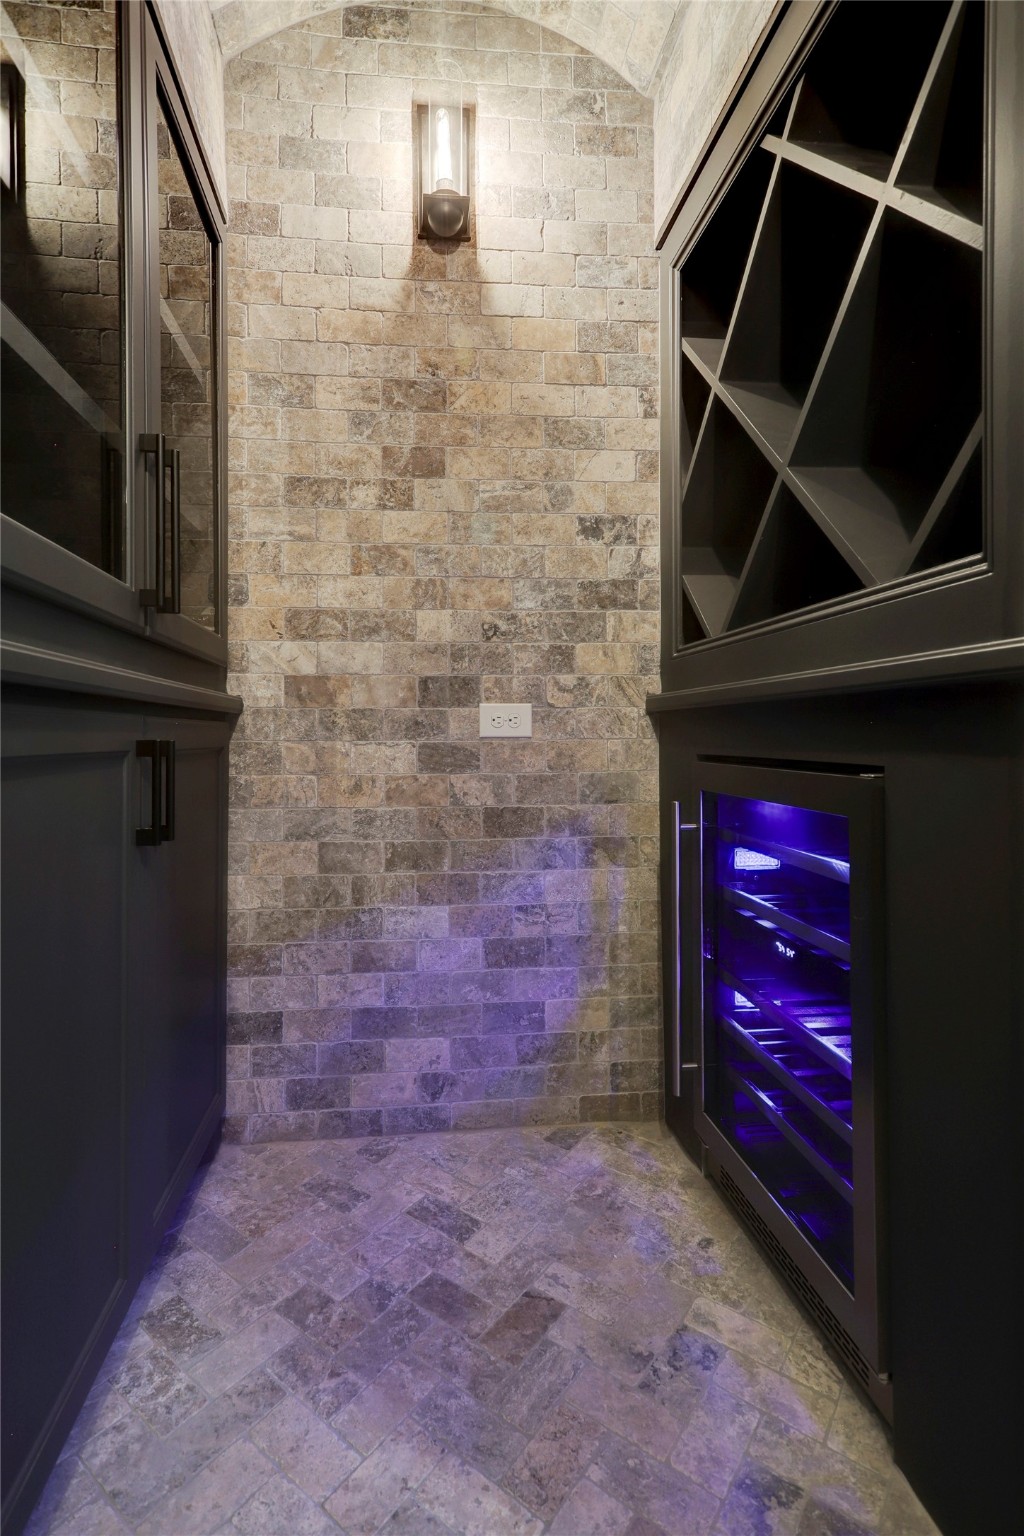 Another view of the wine cellar in a recent Wood Custom Homes completion.